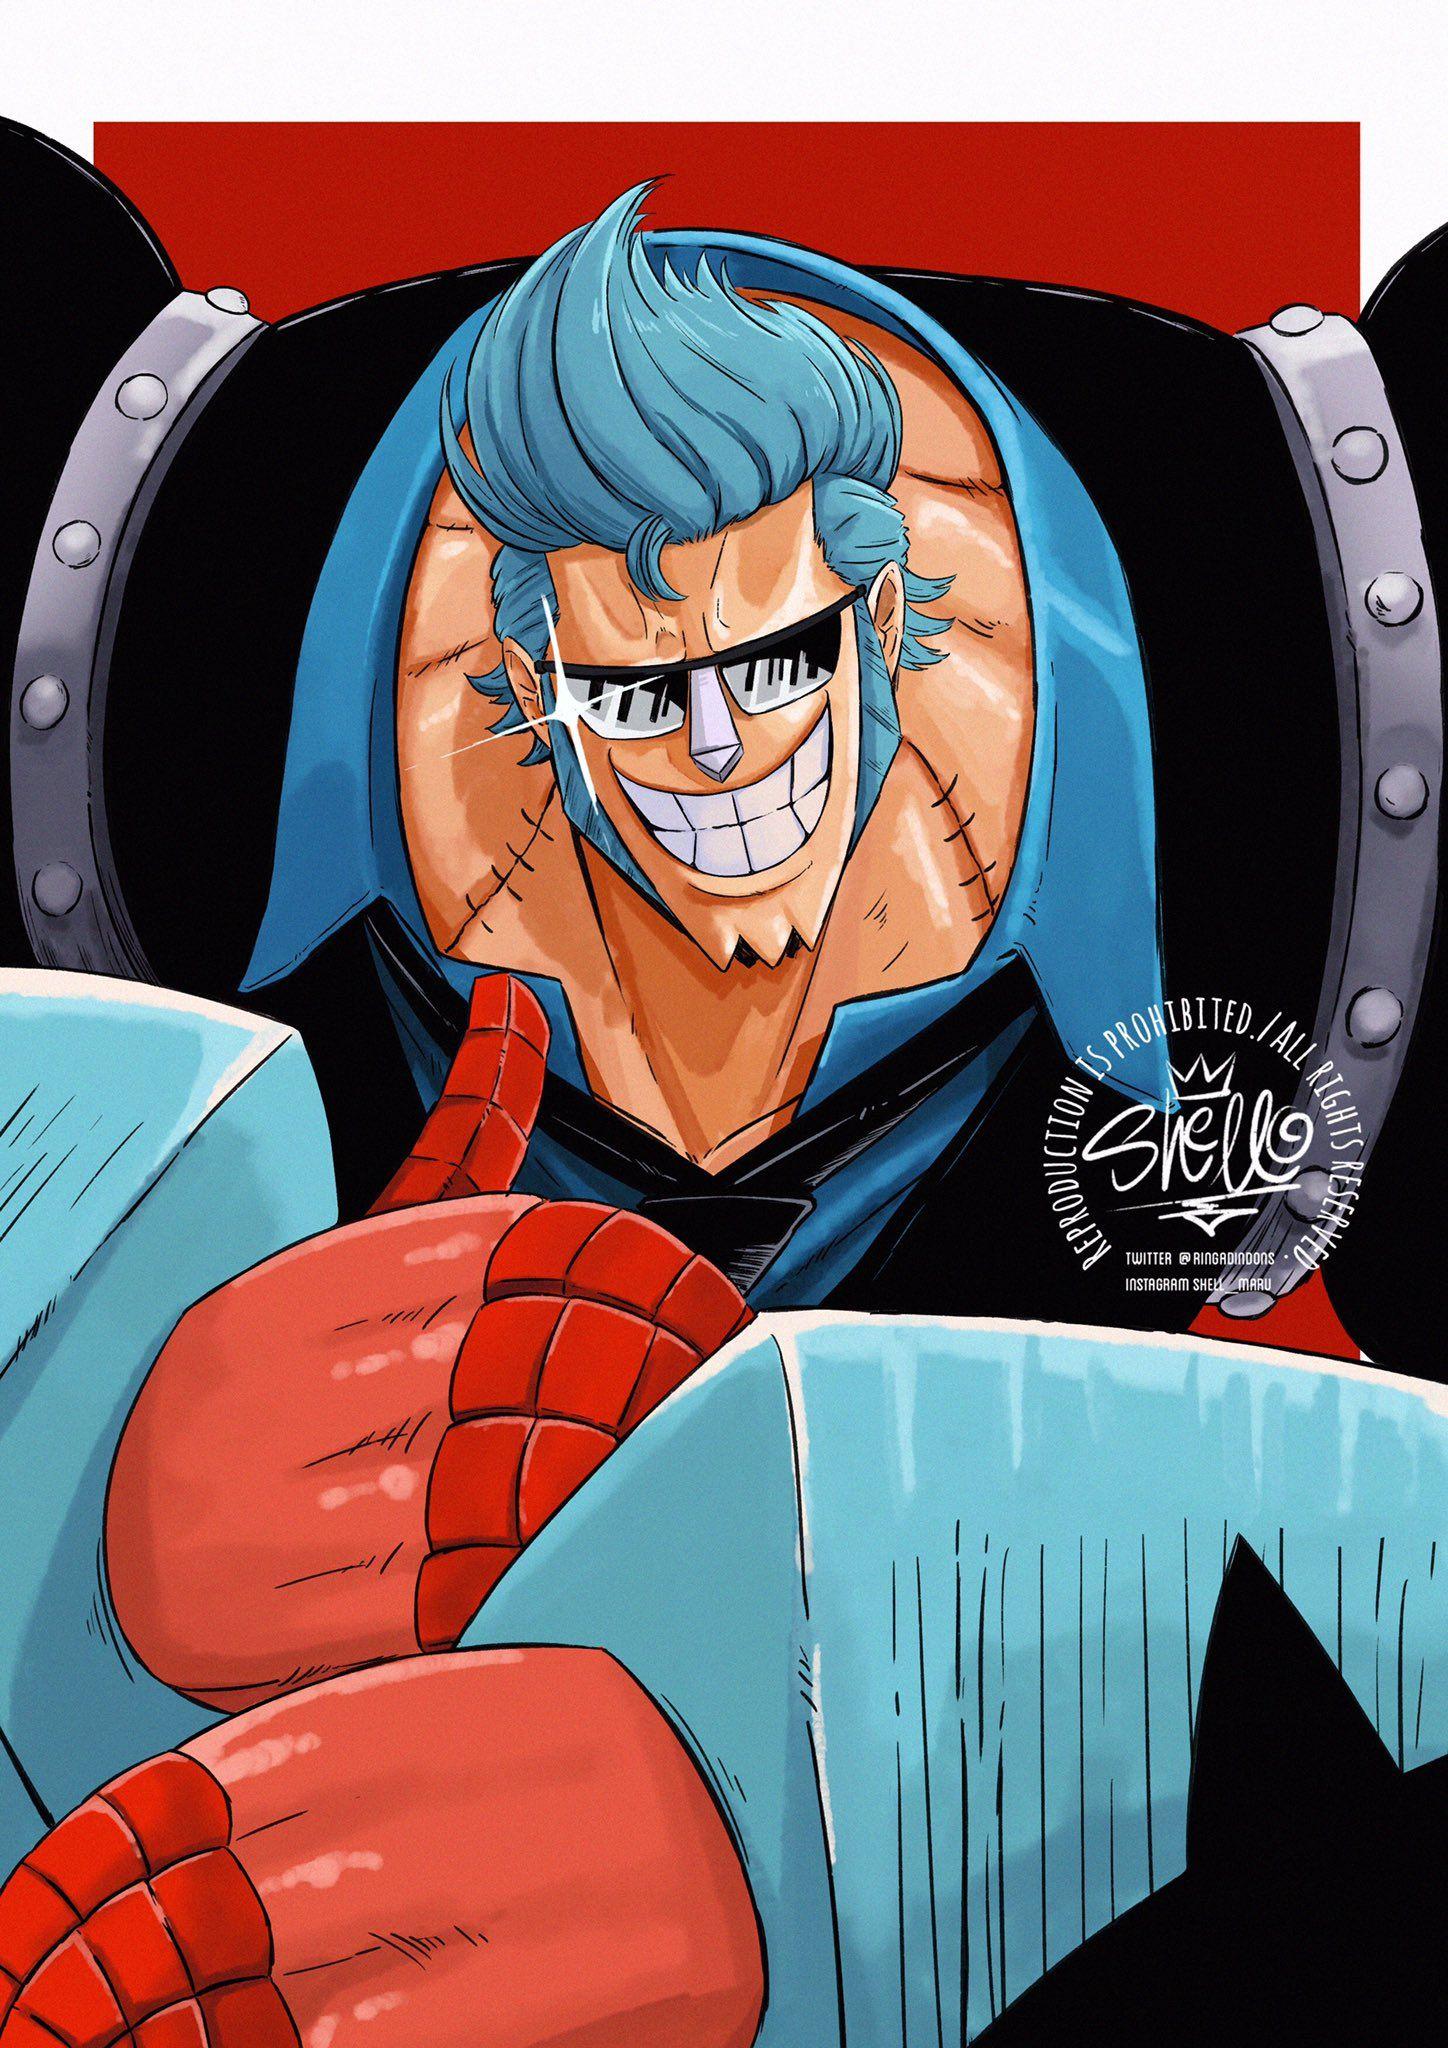 Franky One Piece Wallpapers - Top Free Franky One Piece Backgrounds